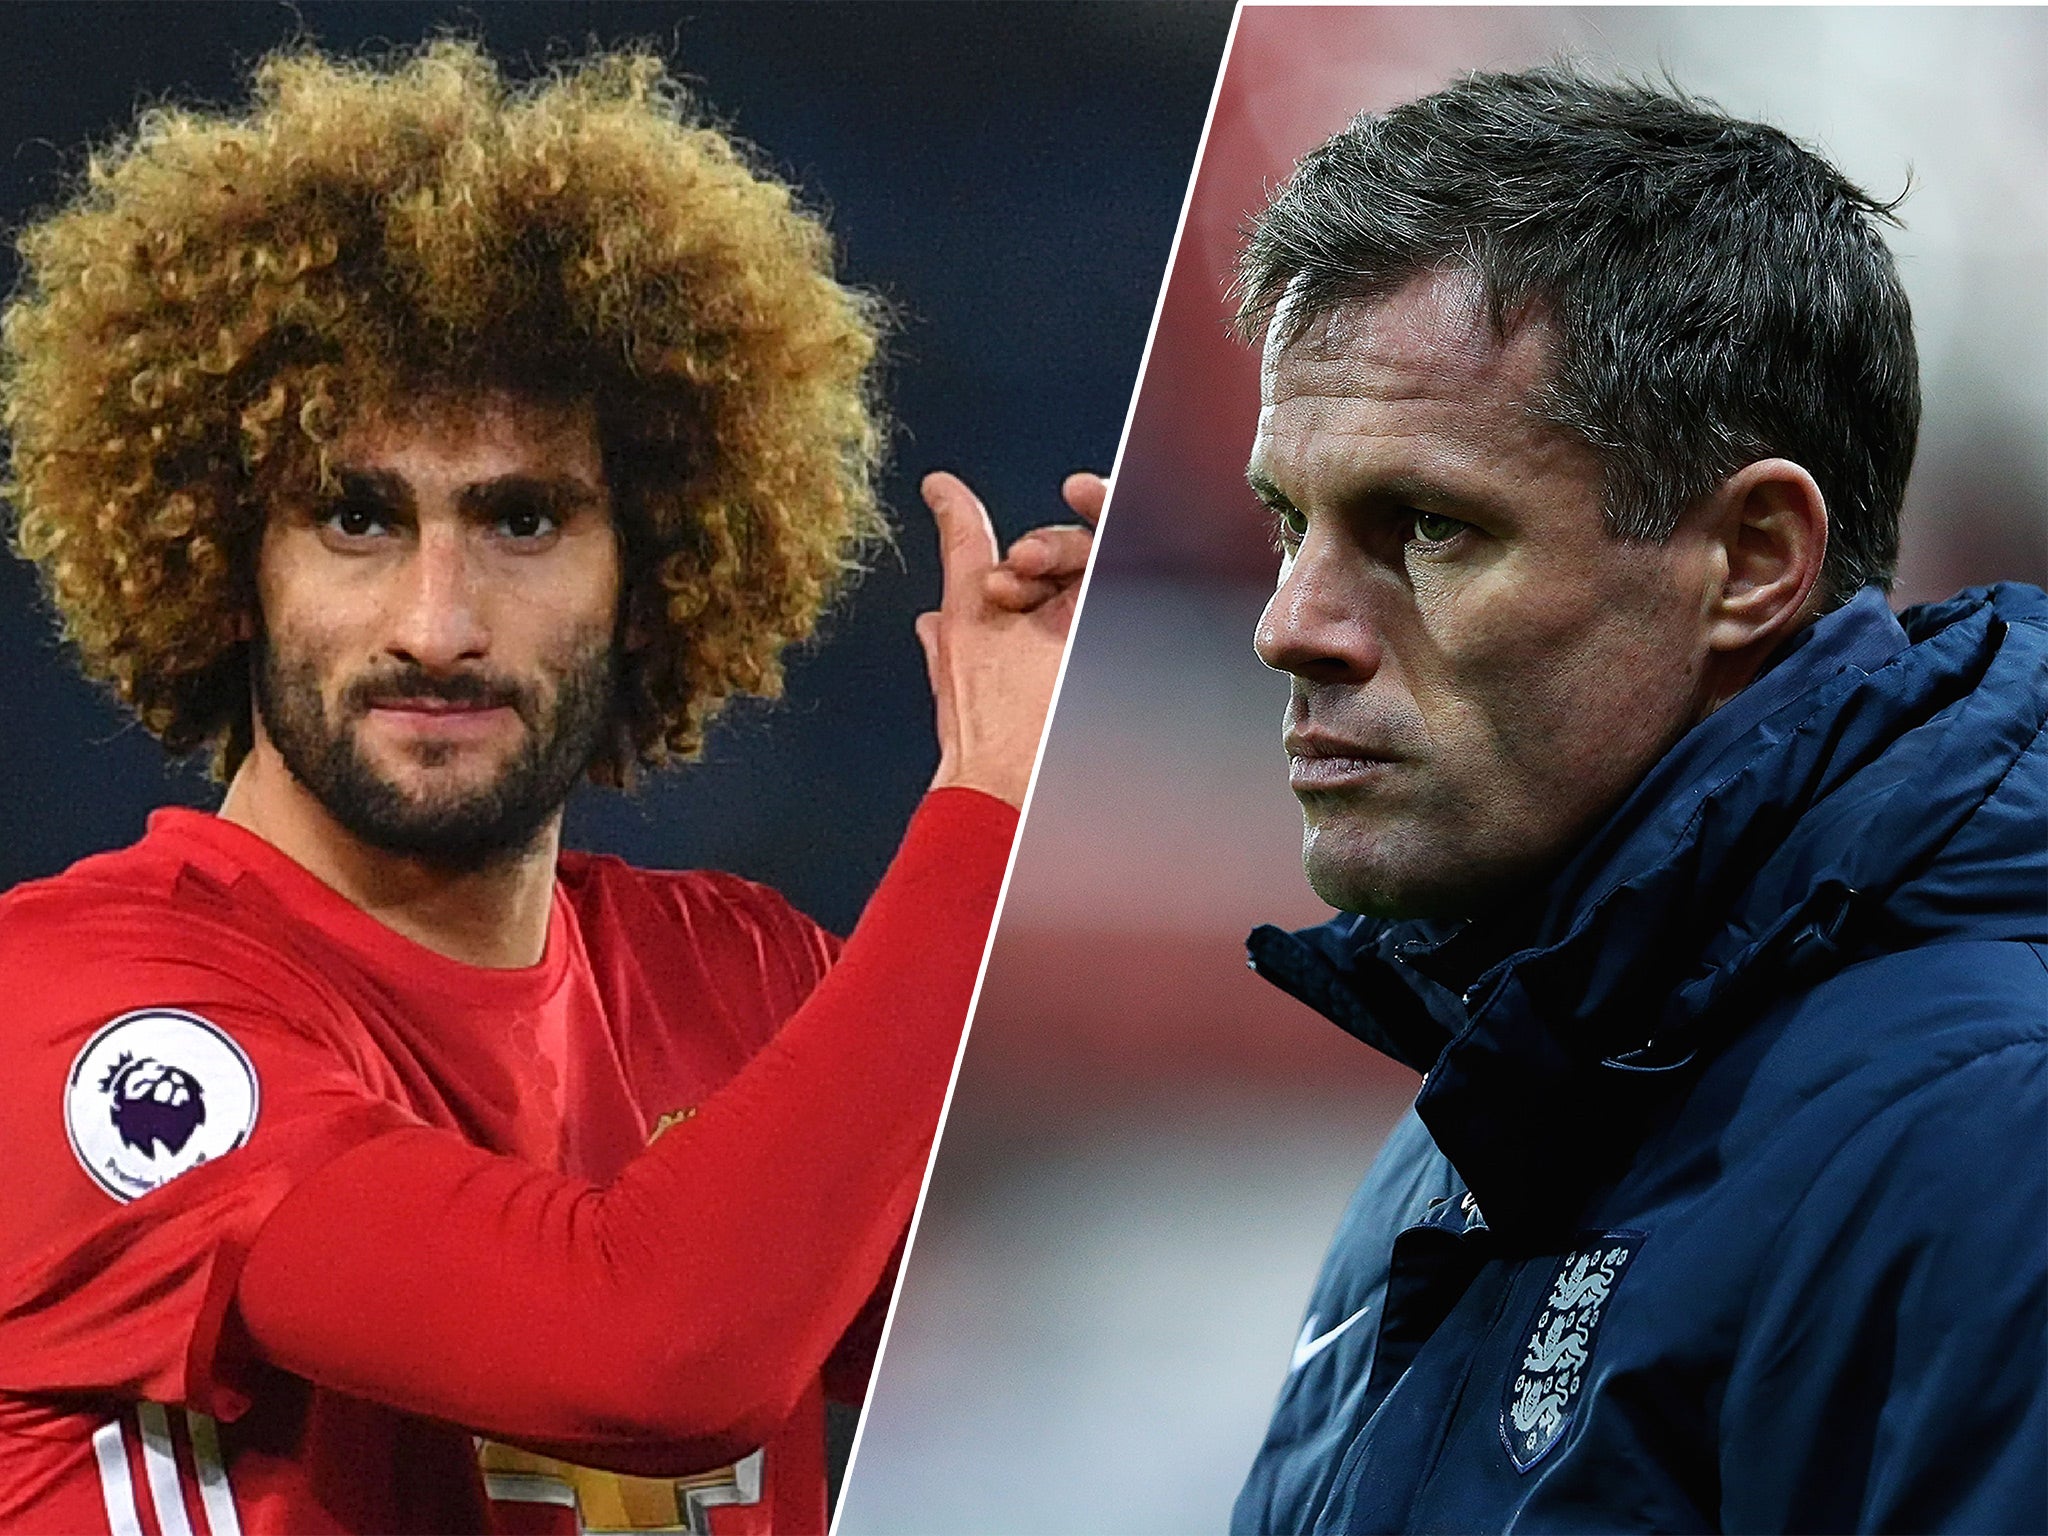 Marouane Fellaini suggested that Jamie Carragher's criticism was hypocritical